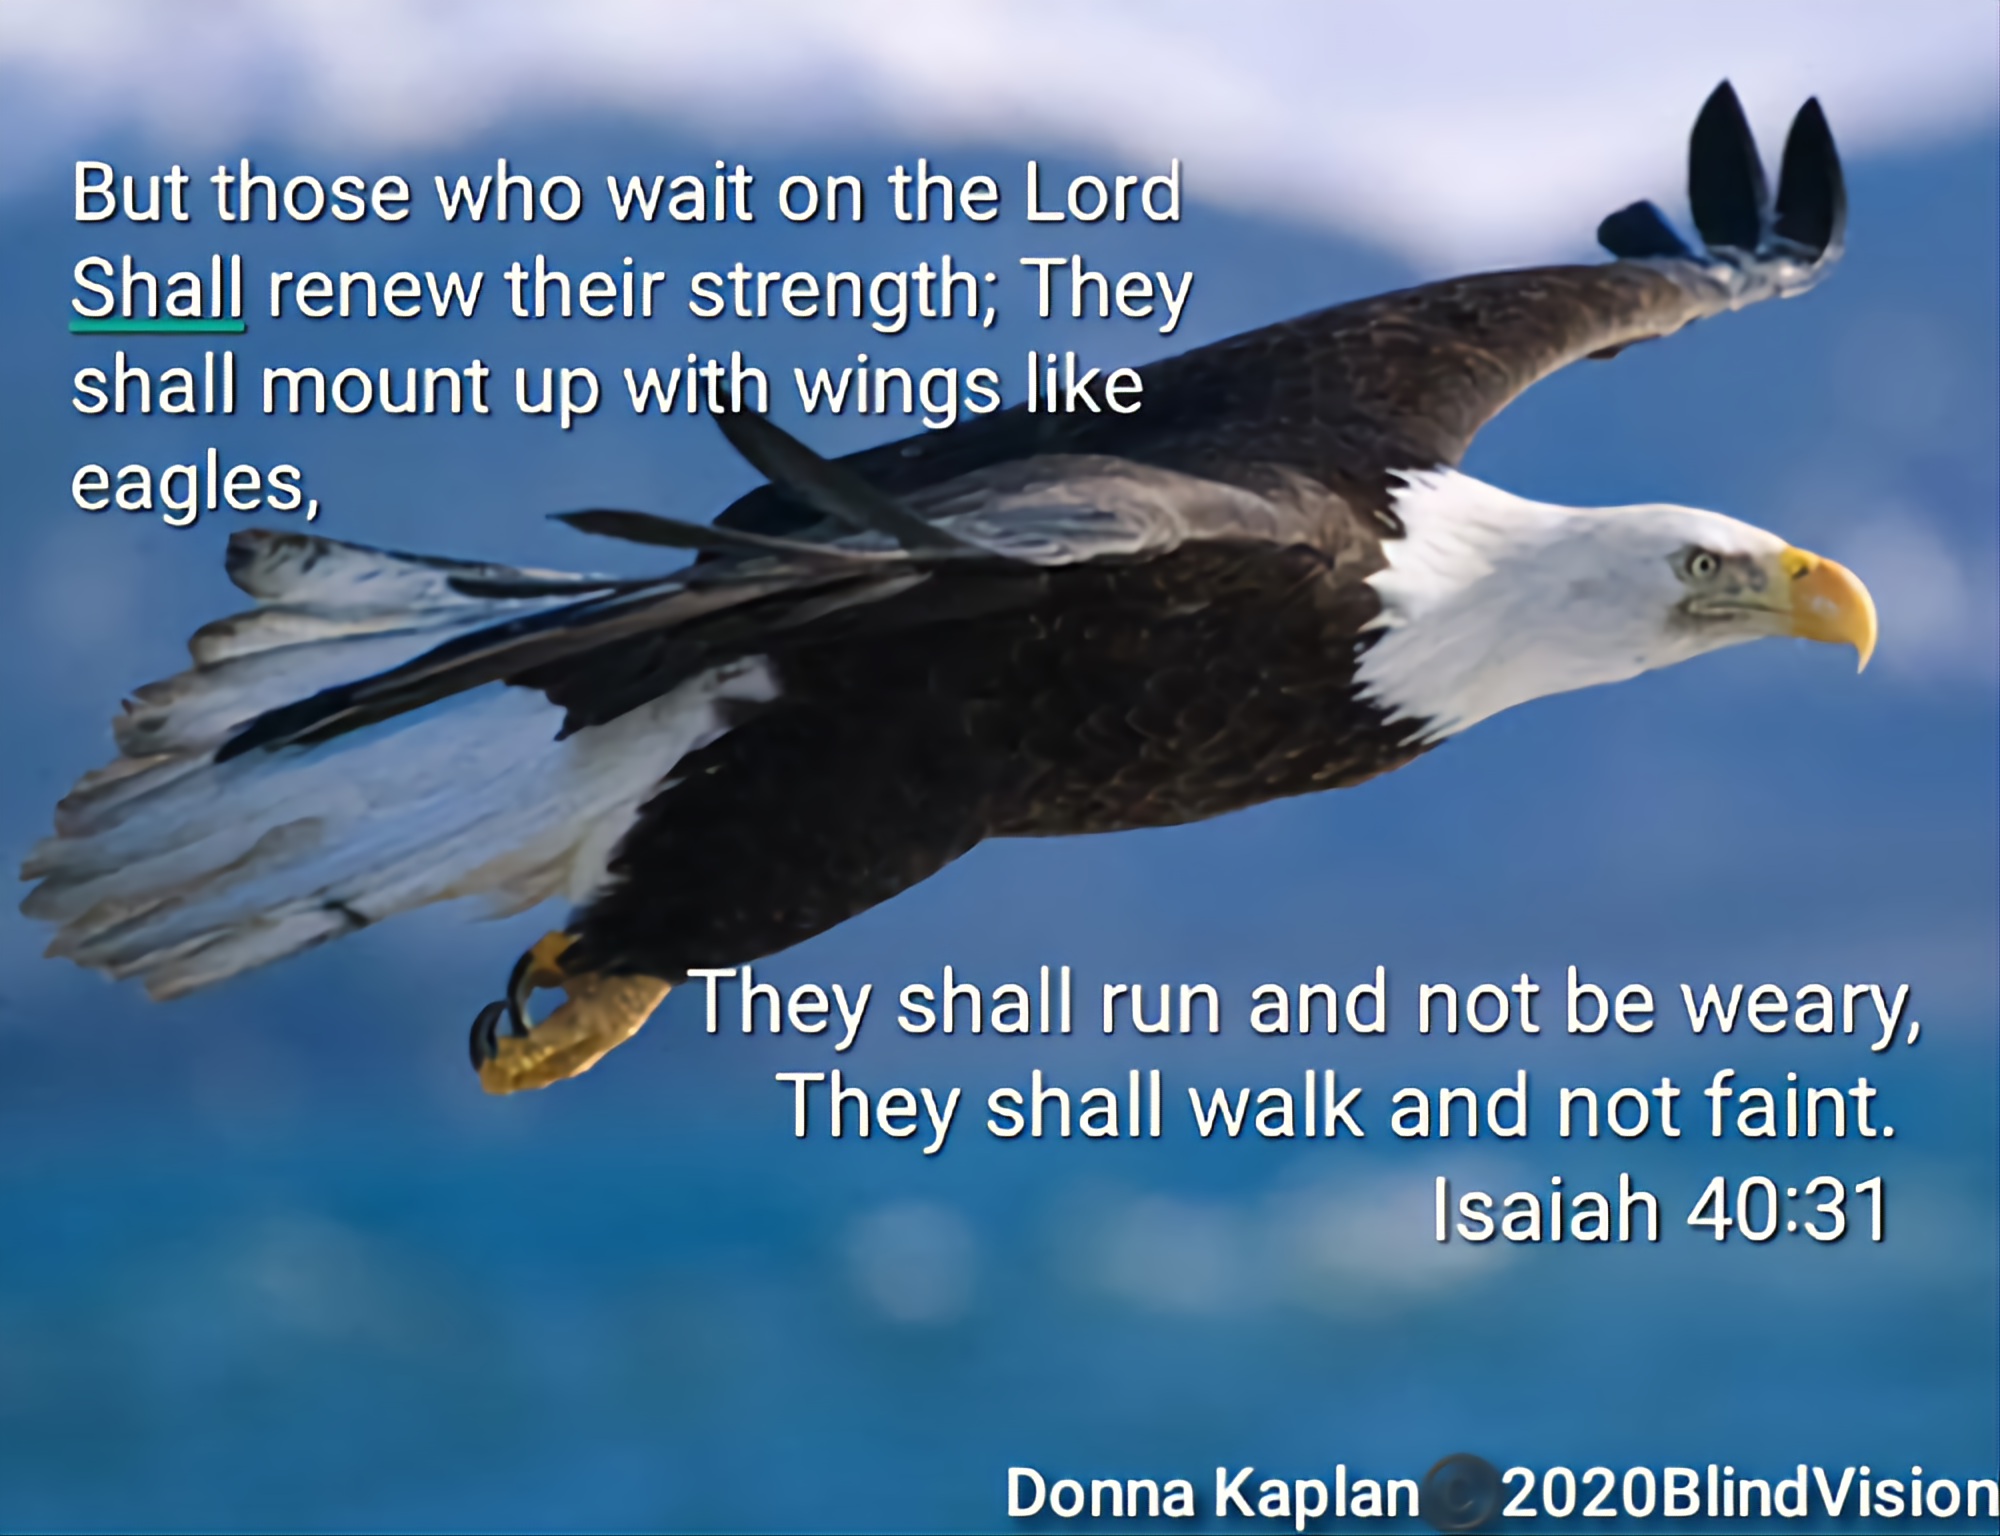 But those who wait on the Lord Shall renew their strength; shall mount up with wings like eagles, They shall run and not be weary; shall walk and not faint: Isaiah 40.31 Donna Kaplan 202OBlindVision They They